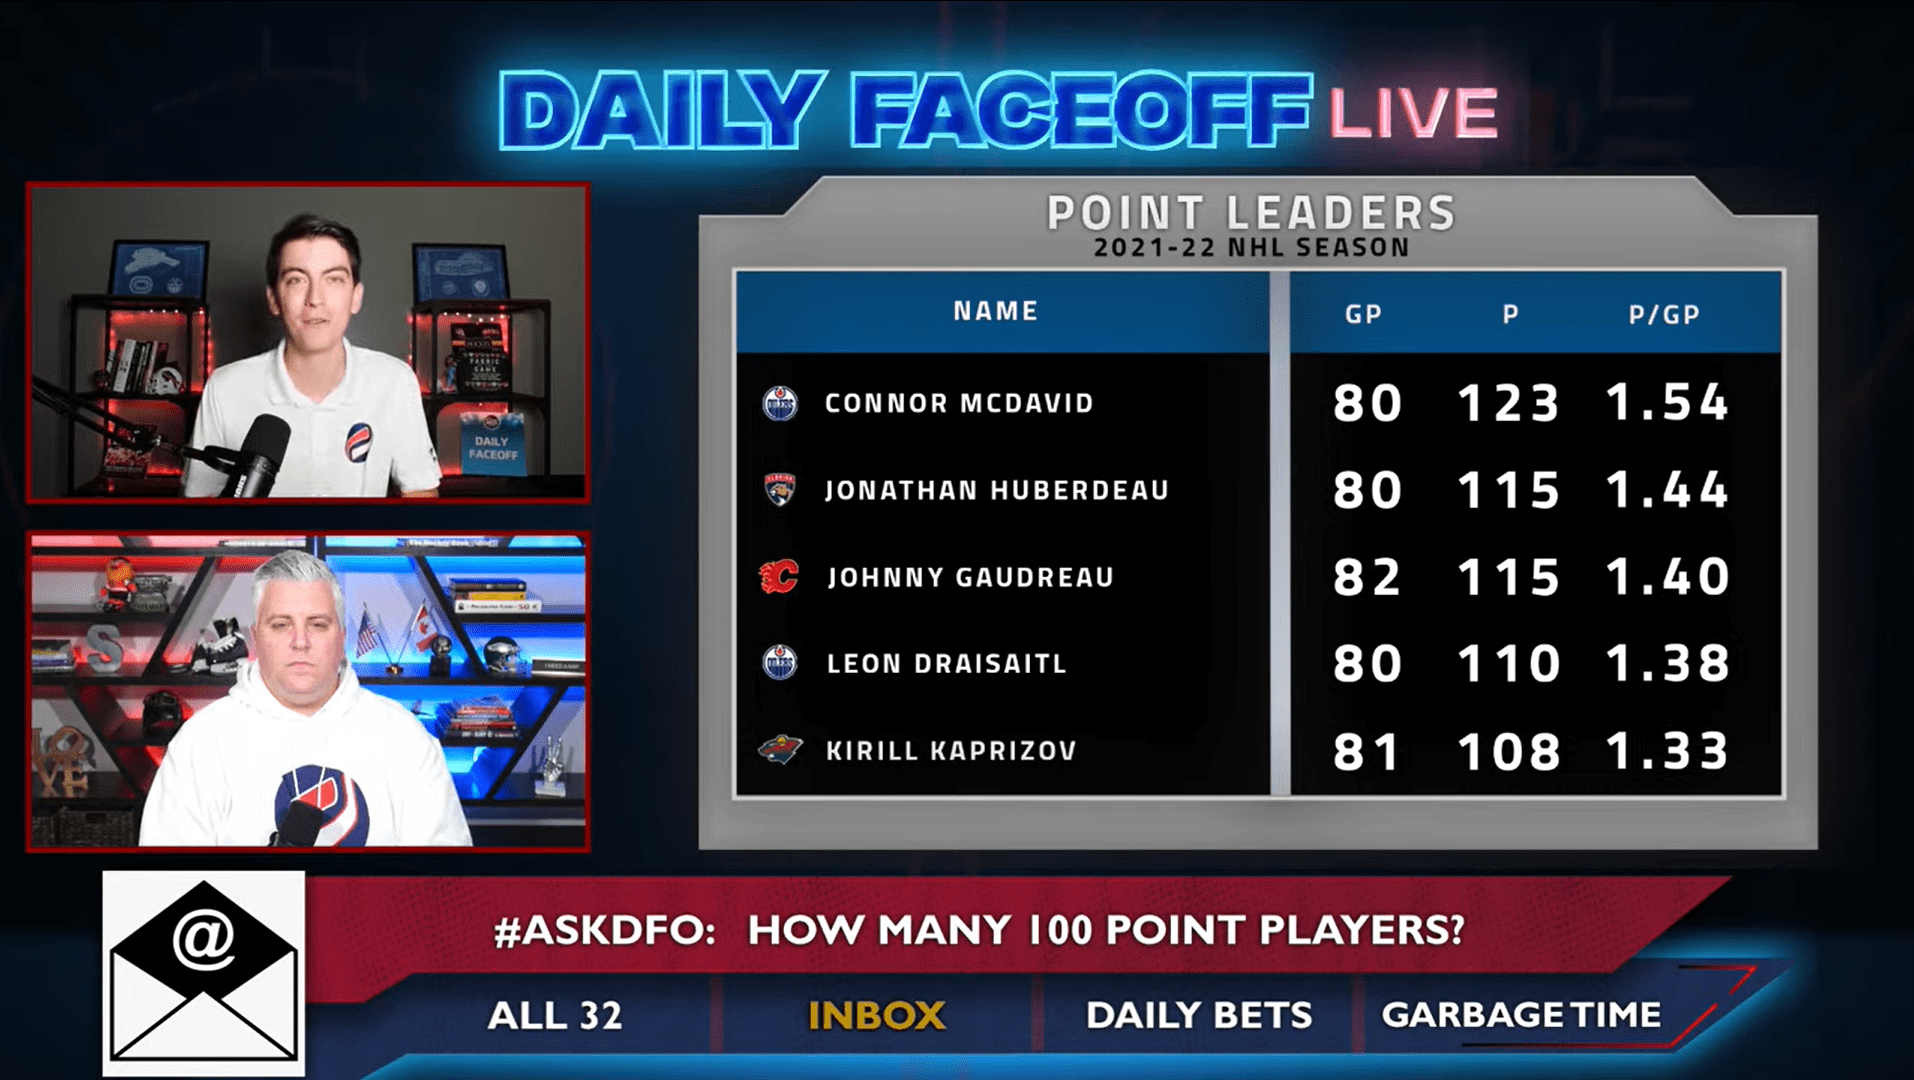 Daily Faceoff Live: How many players hit 100 points this season?